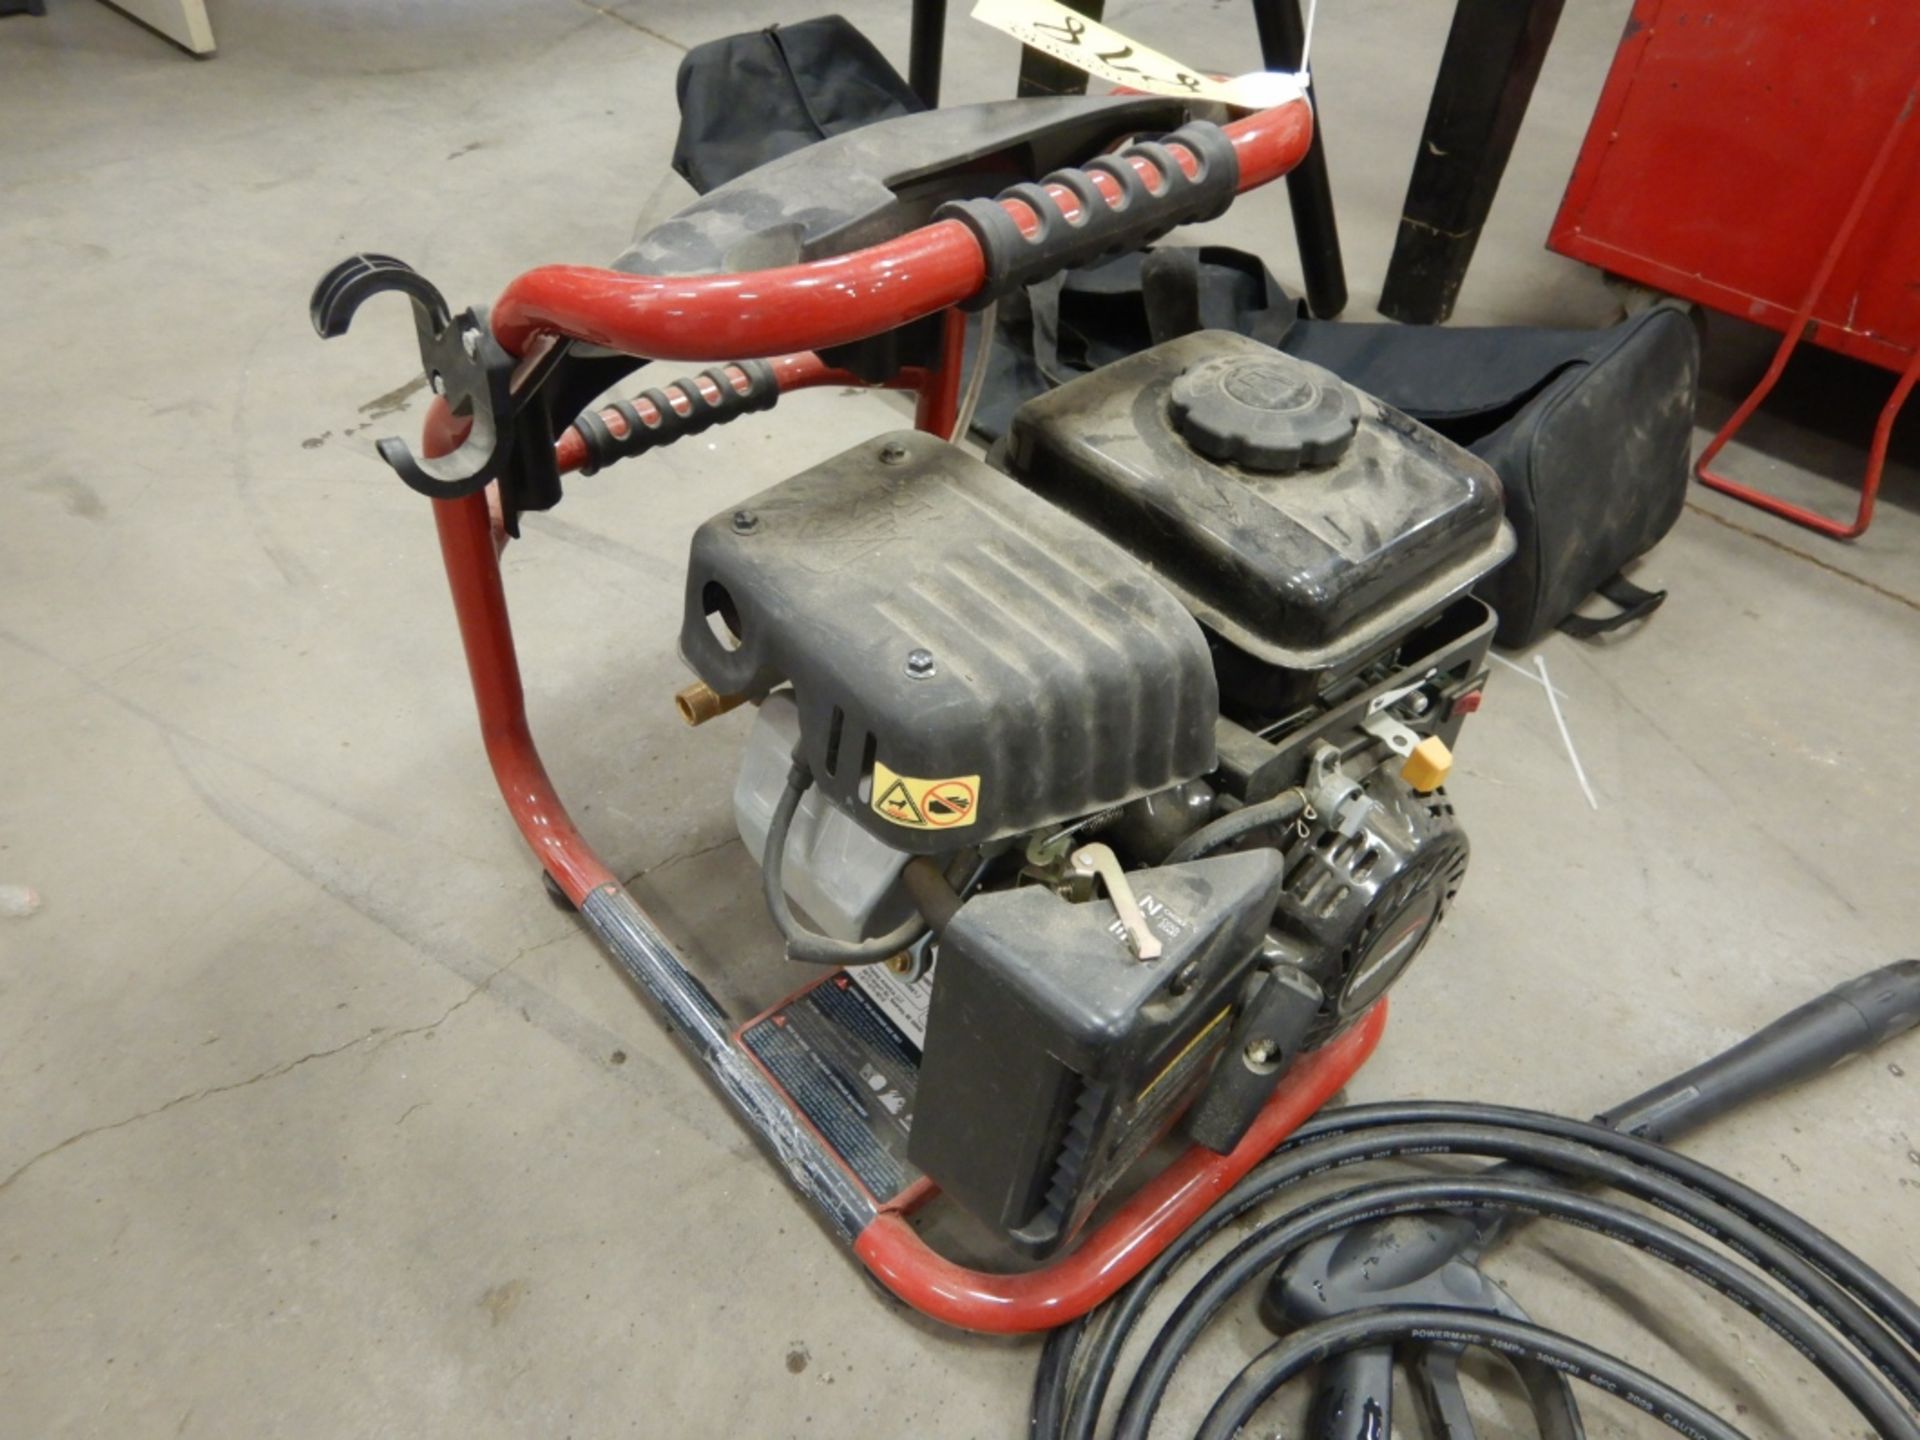 POWER MATE 1600 PSI X 1.5 GPM PRESSURE WASHER, MODEL MONSOON - Image 3 of 5